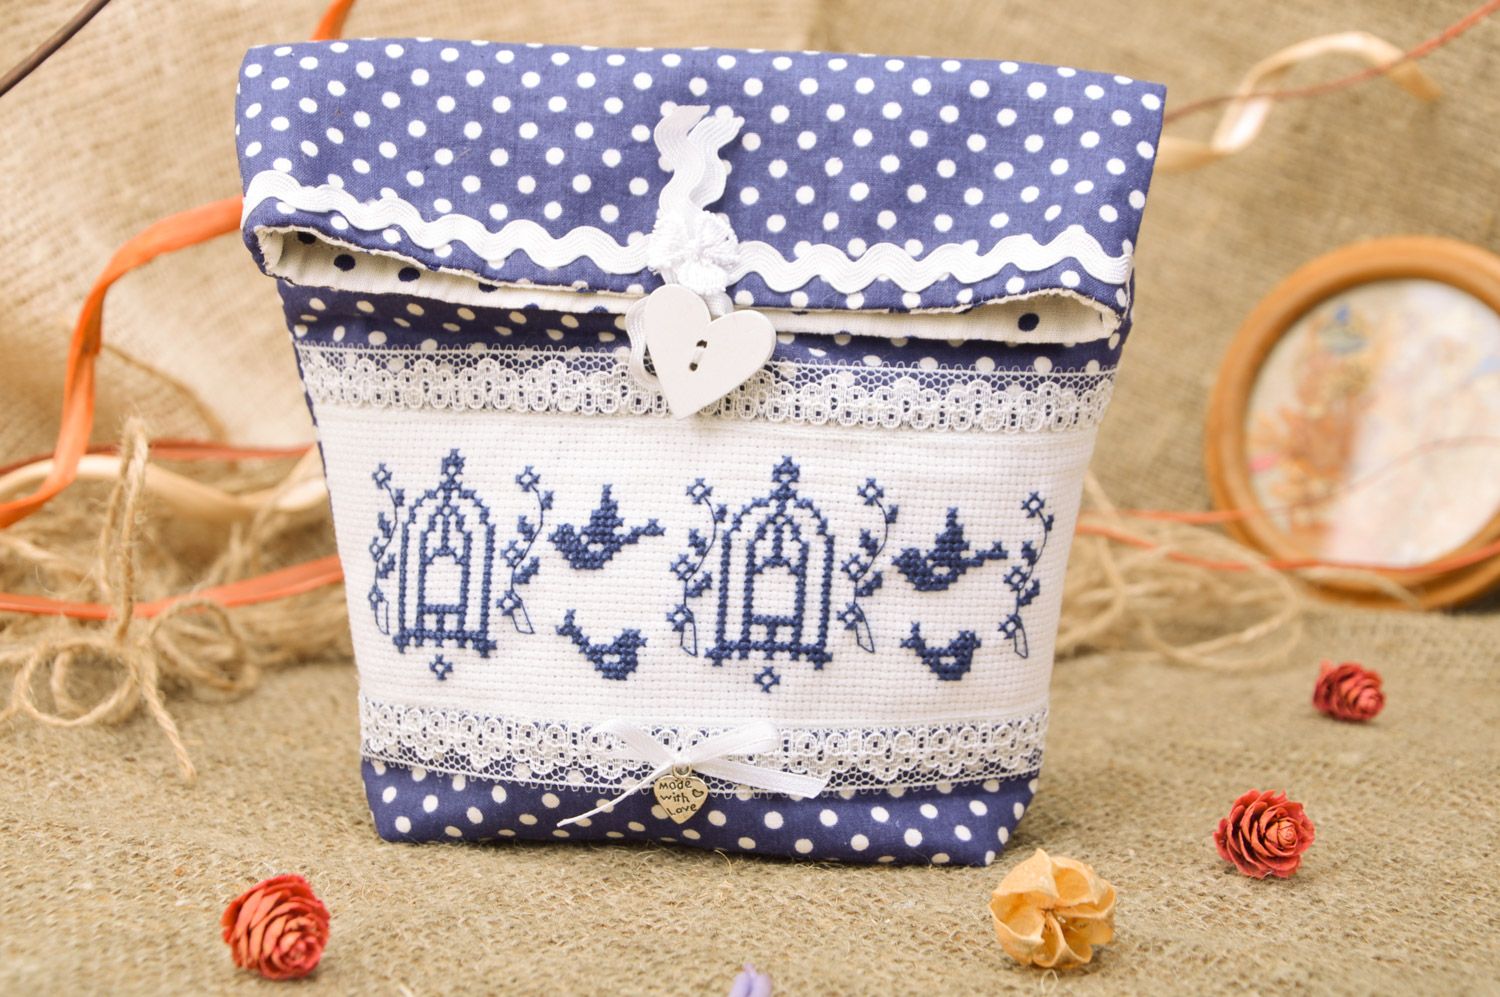 Cute handmade cosmetics bag sewn of blue polka dot cotton fabric with embroidery photo 1